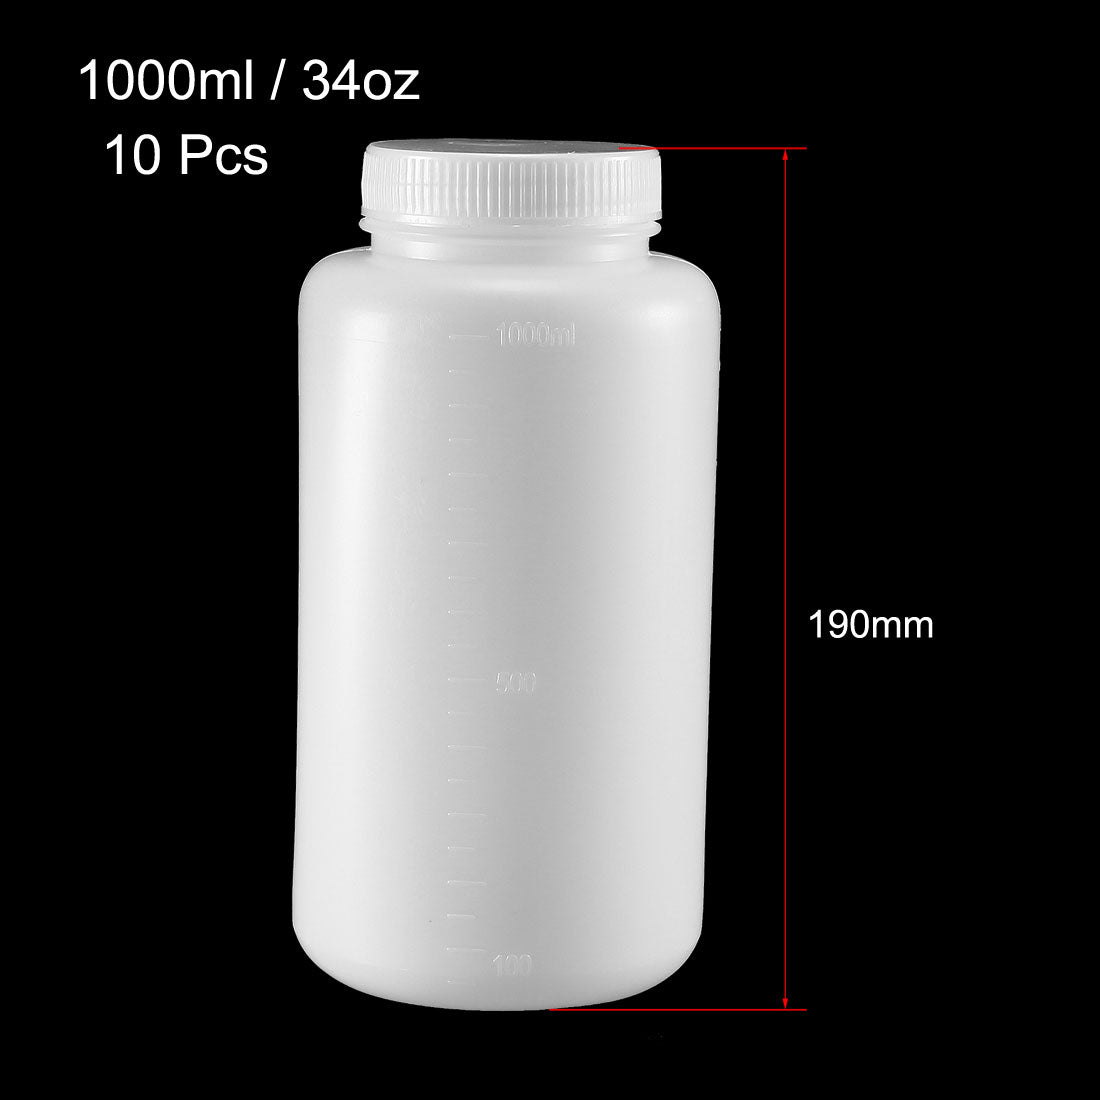 Uxcell Uxcell Plastic Lab Chemical Reagent Bottle 1000ml/34oz Wide Mouth Sample Sealing Liquid Storage Container 10pcs